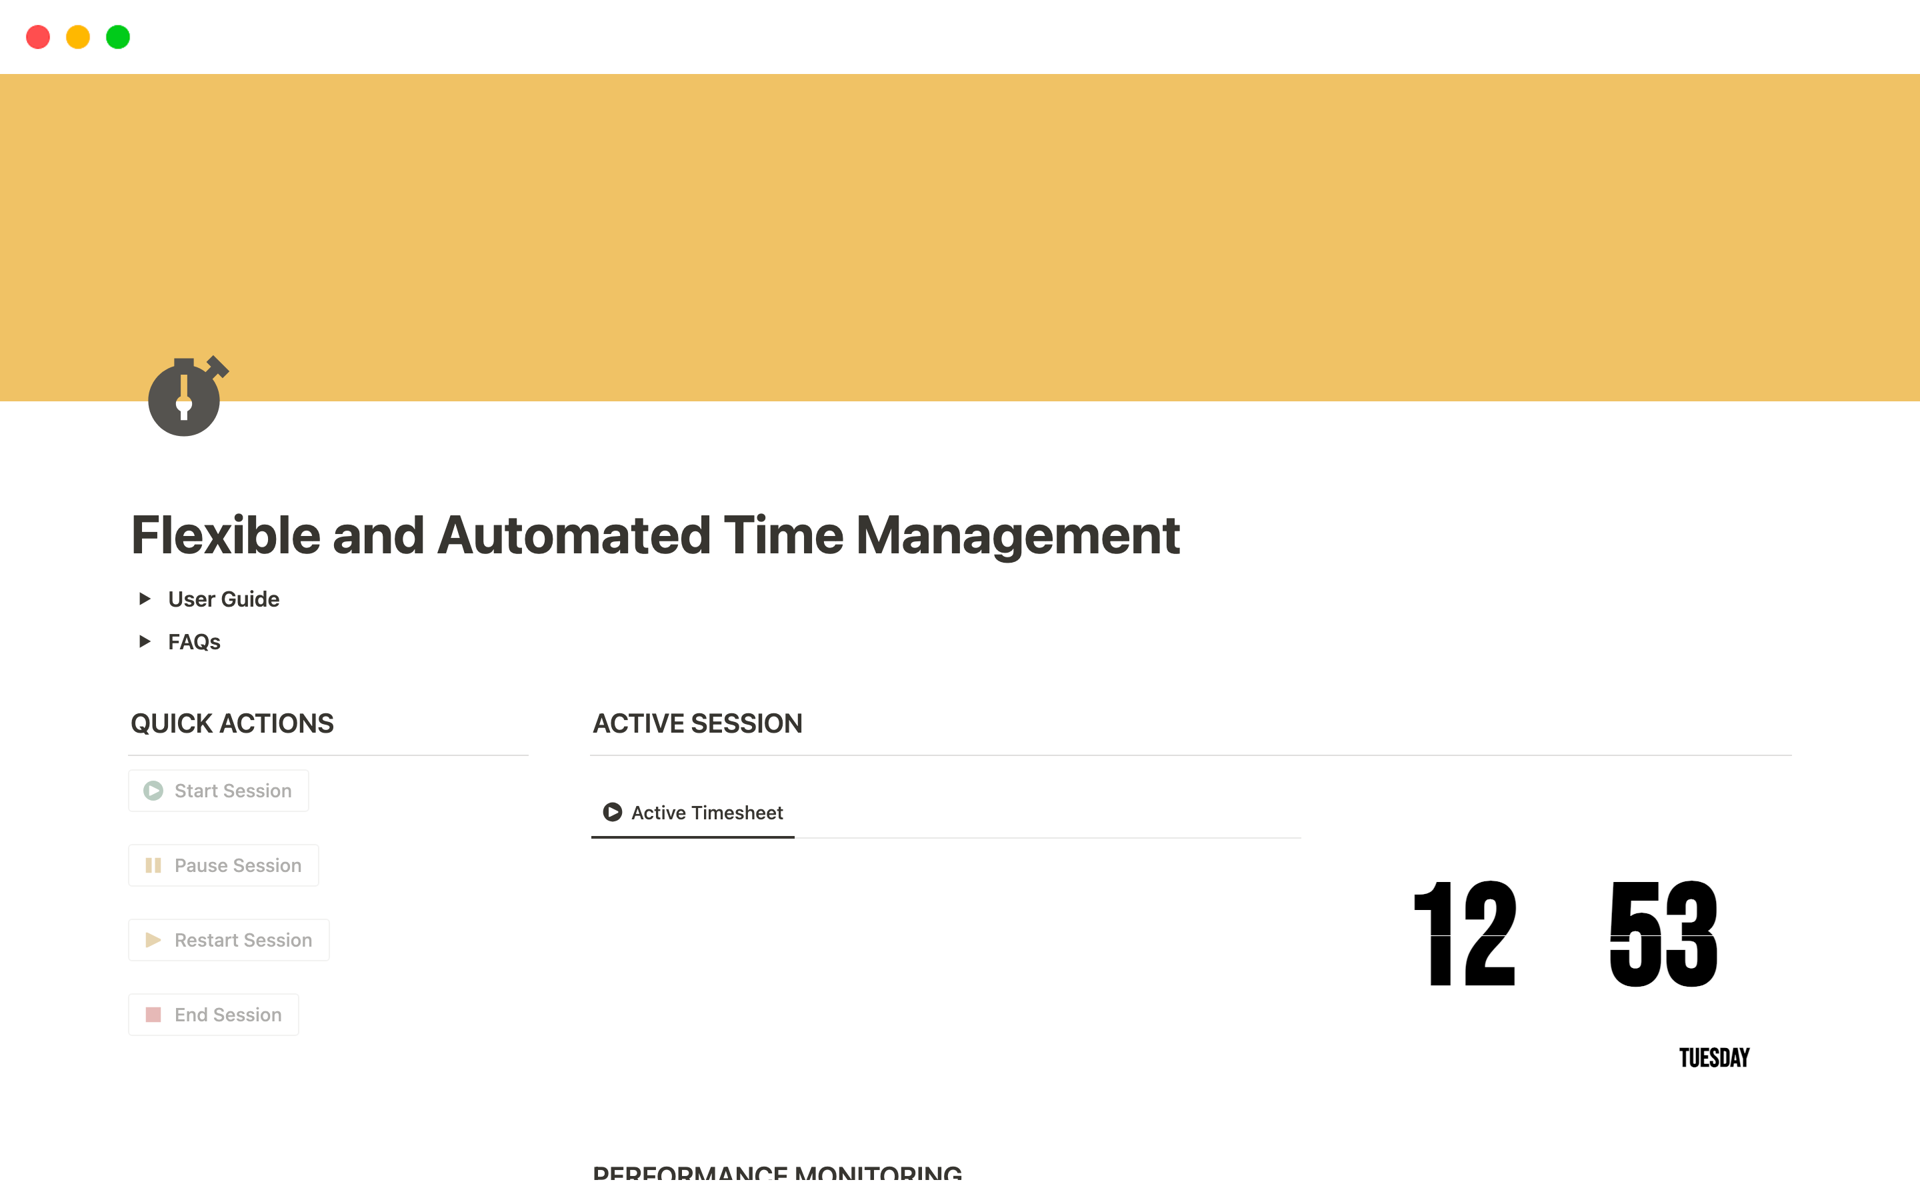 Streamline time management, effortlessly track active sessions, and gain performance insights with this template.